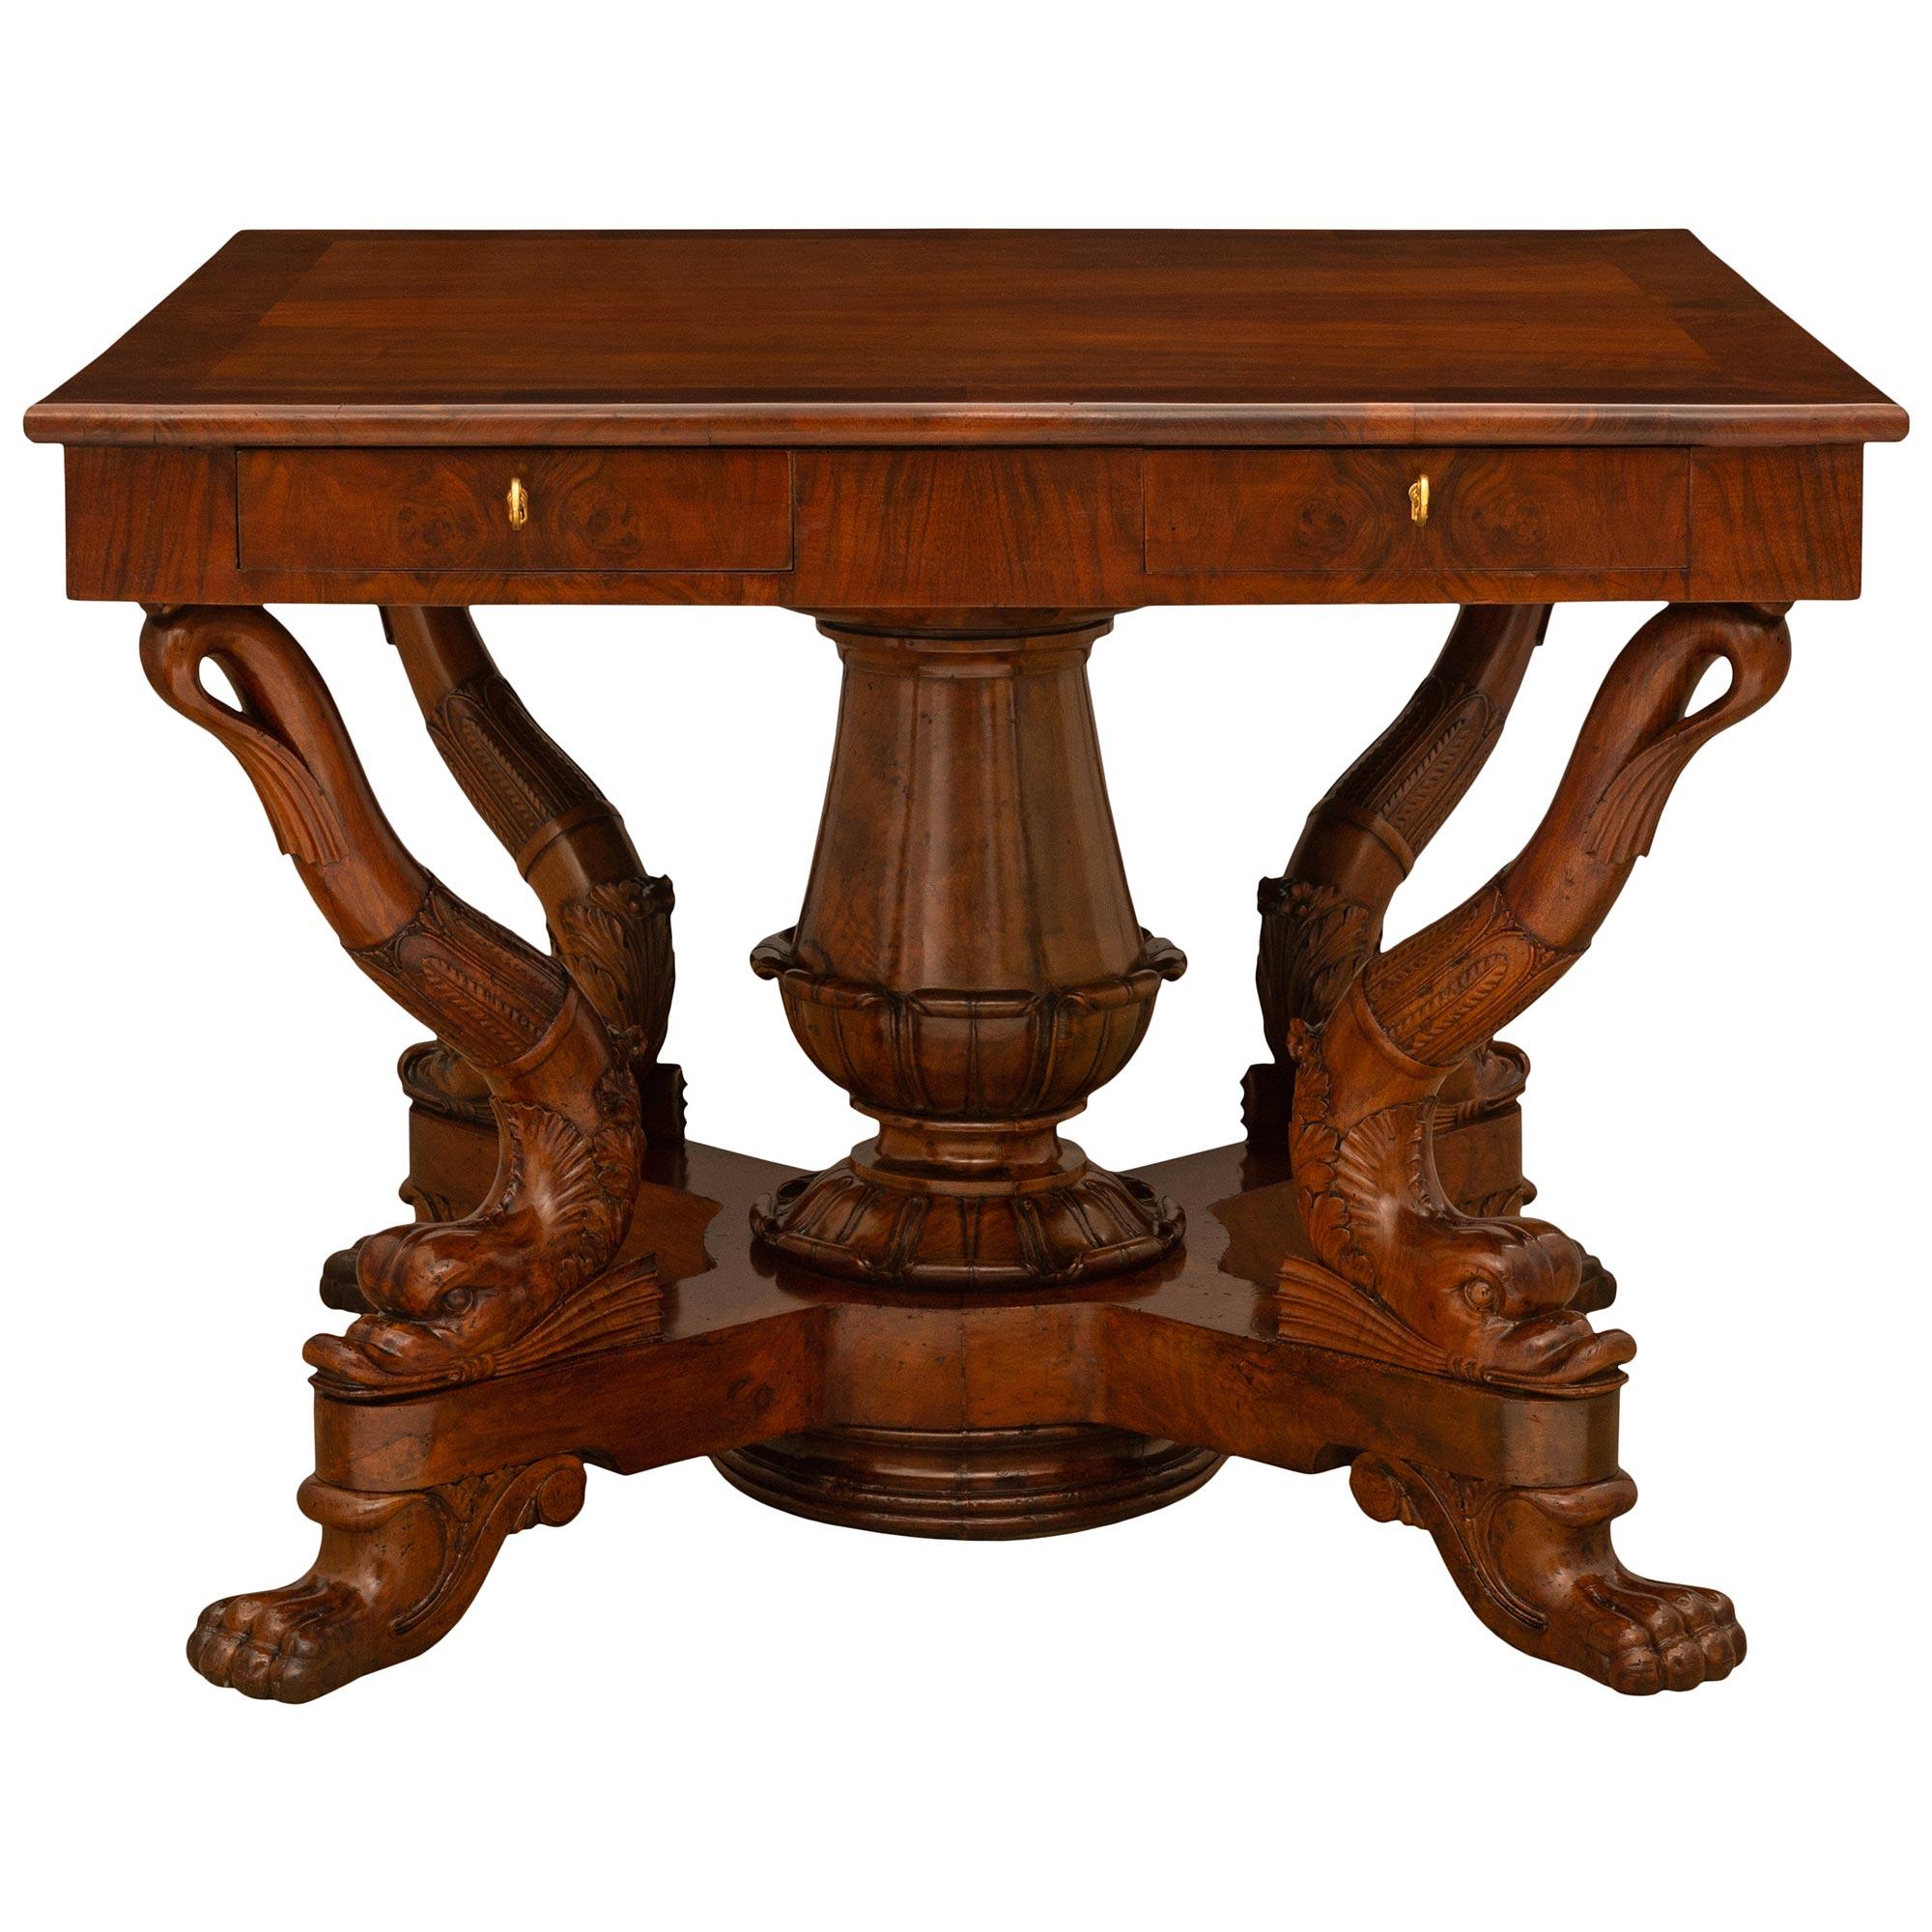 A sensational and unique Italian 19th century Genovese st. Charles X Period Walnut center/dining table. The table displays a circular top, that is removable to showcase a stunning square top below with four drawers. The table is raised by 'C'